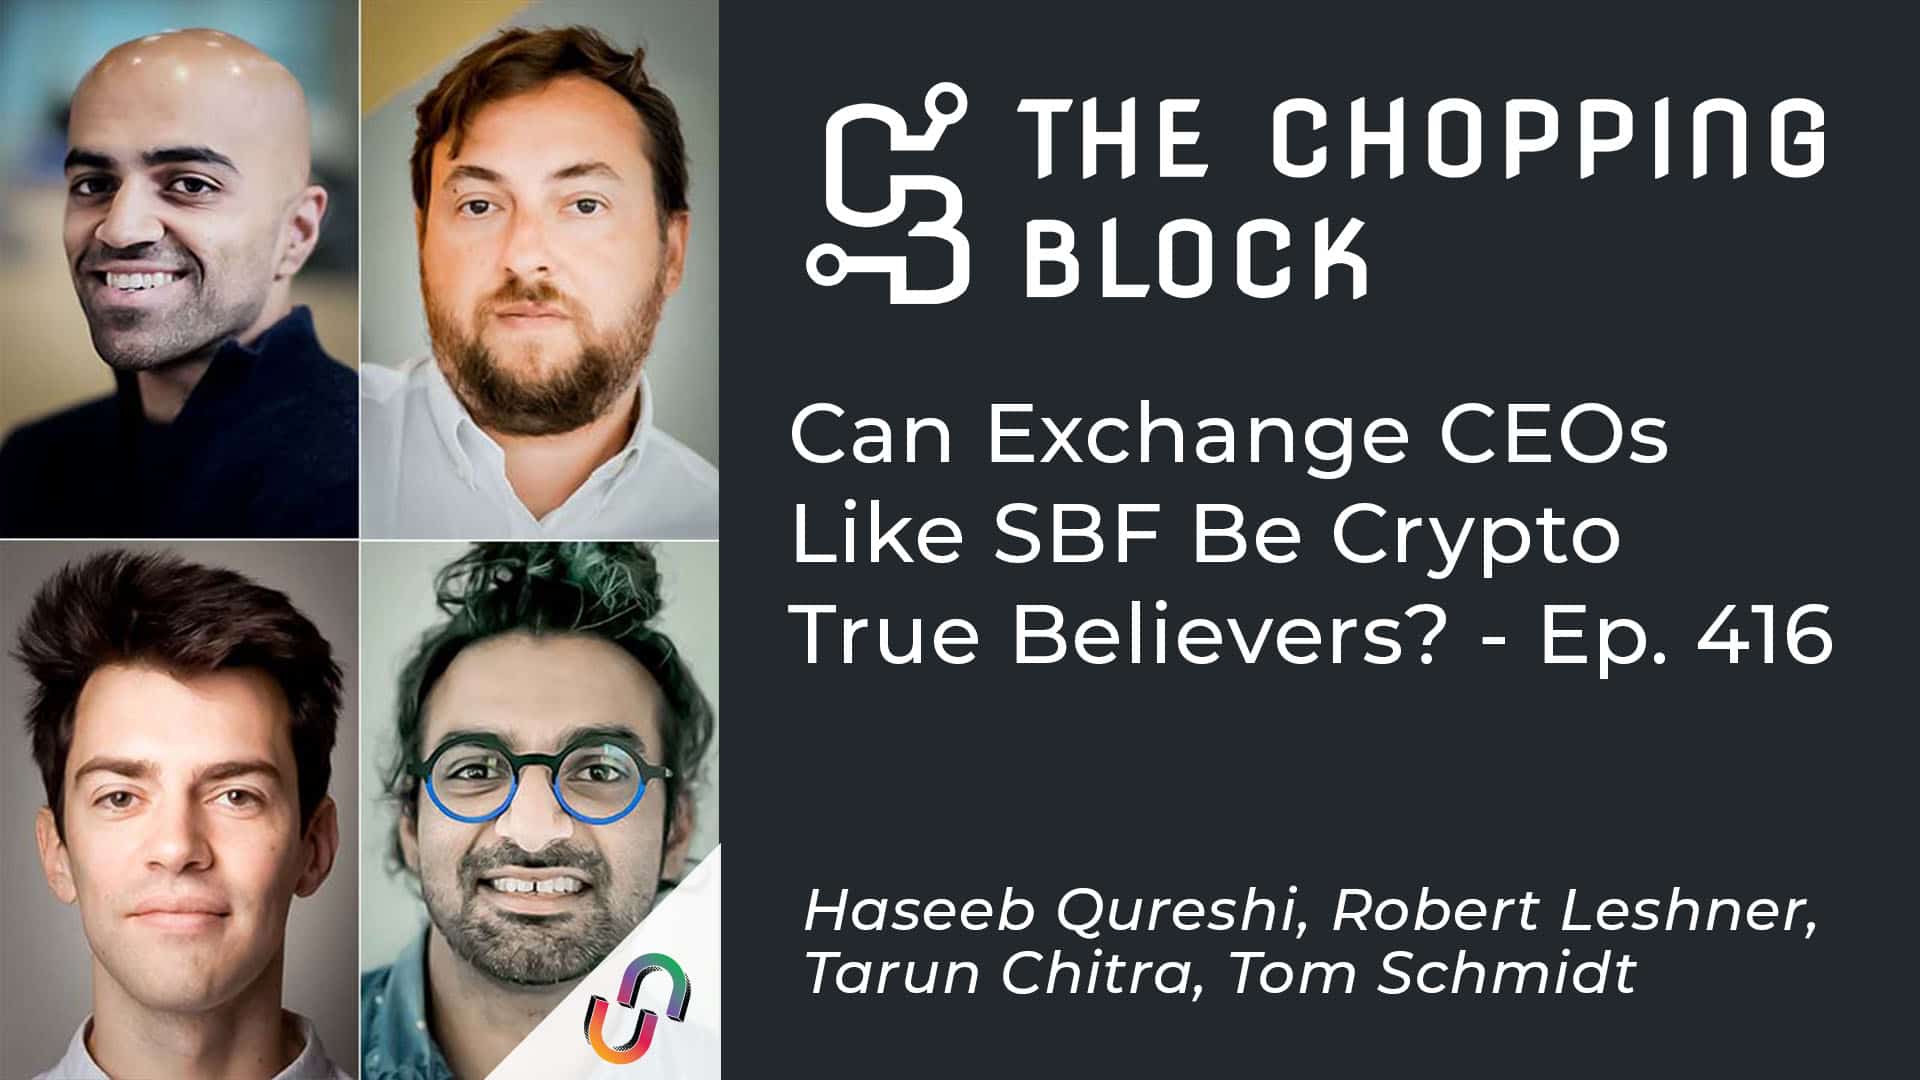 The Chopping Block: Can Exchange CEOs Like SBF Be Crypto True Believers? - Ep. 416